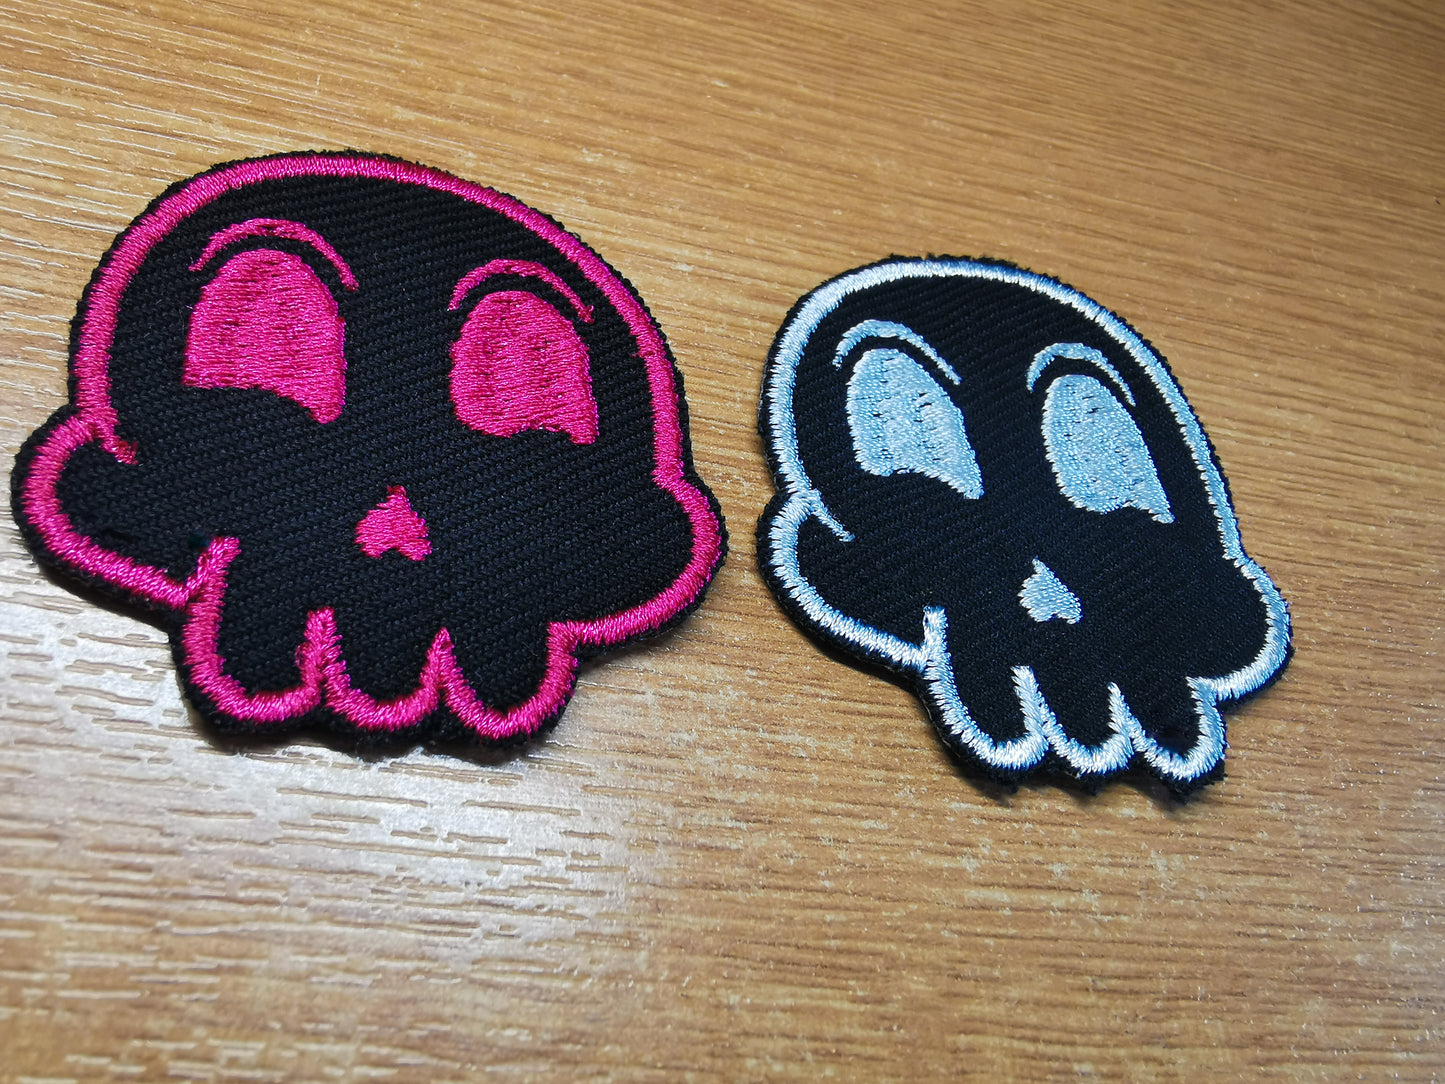 Cute Punk Skulls Embroidered Patch Artwork